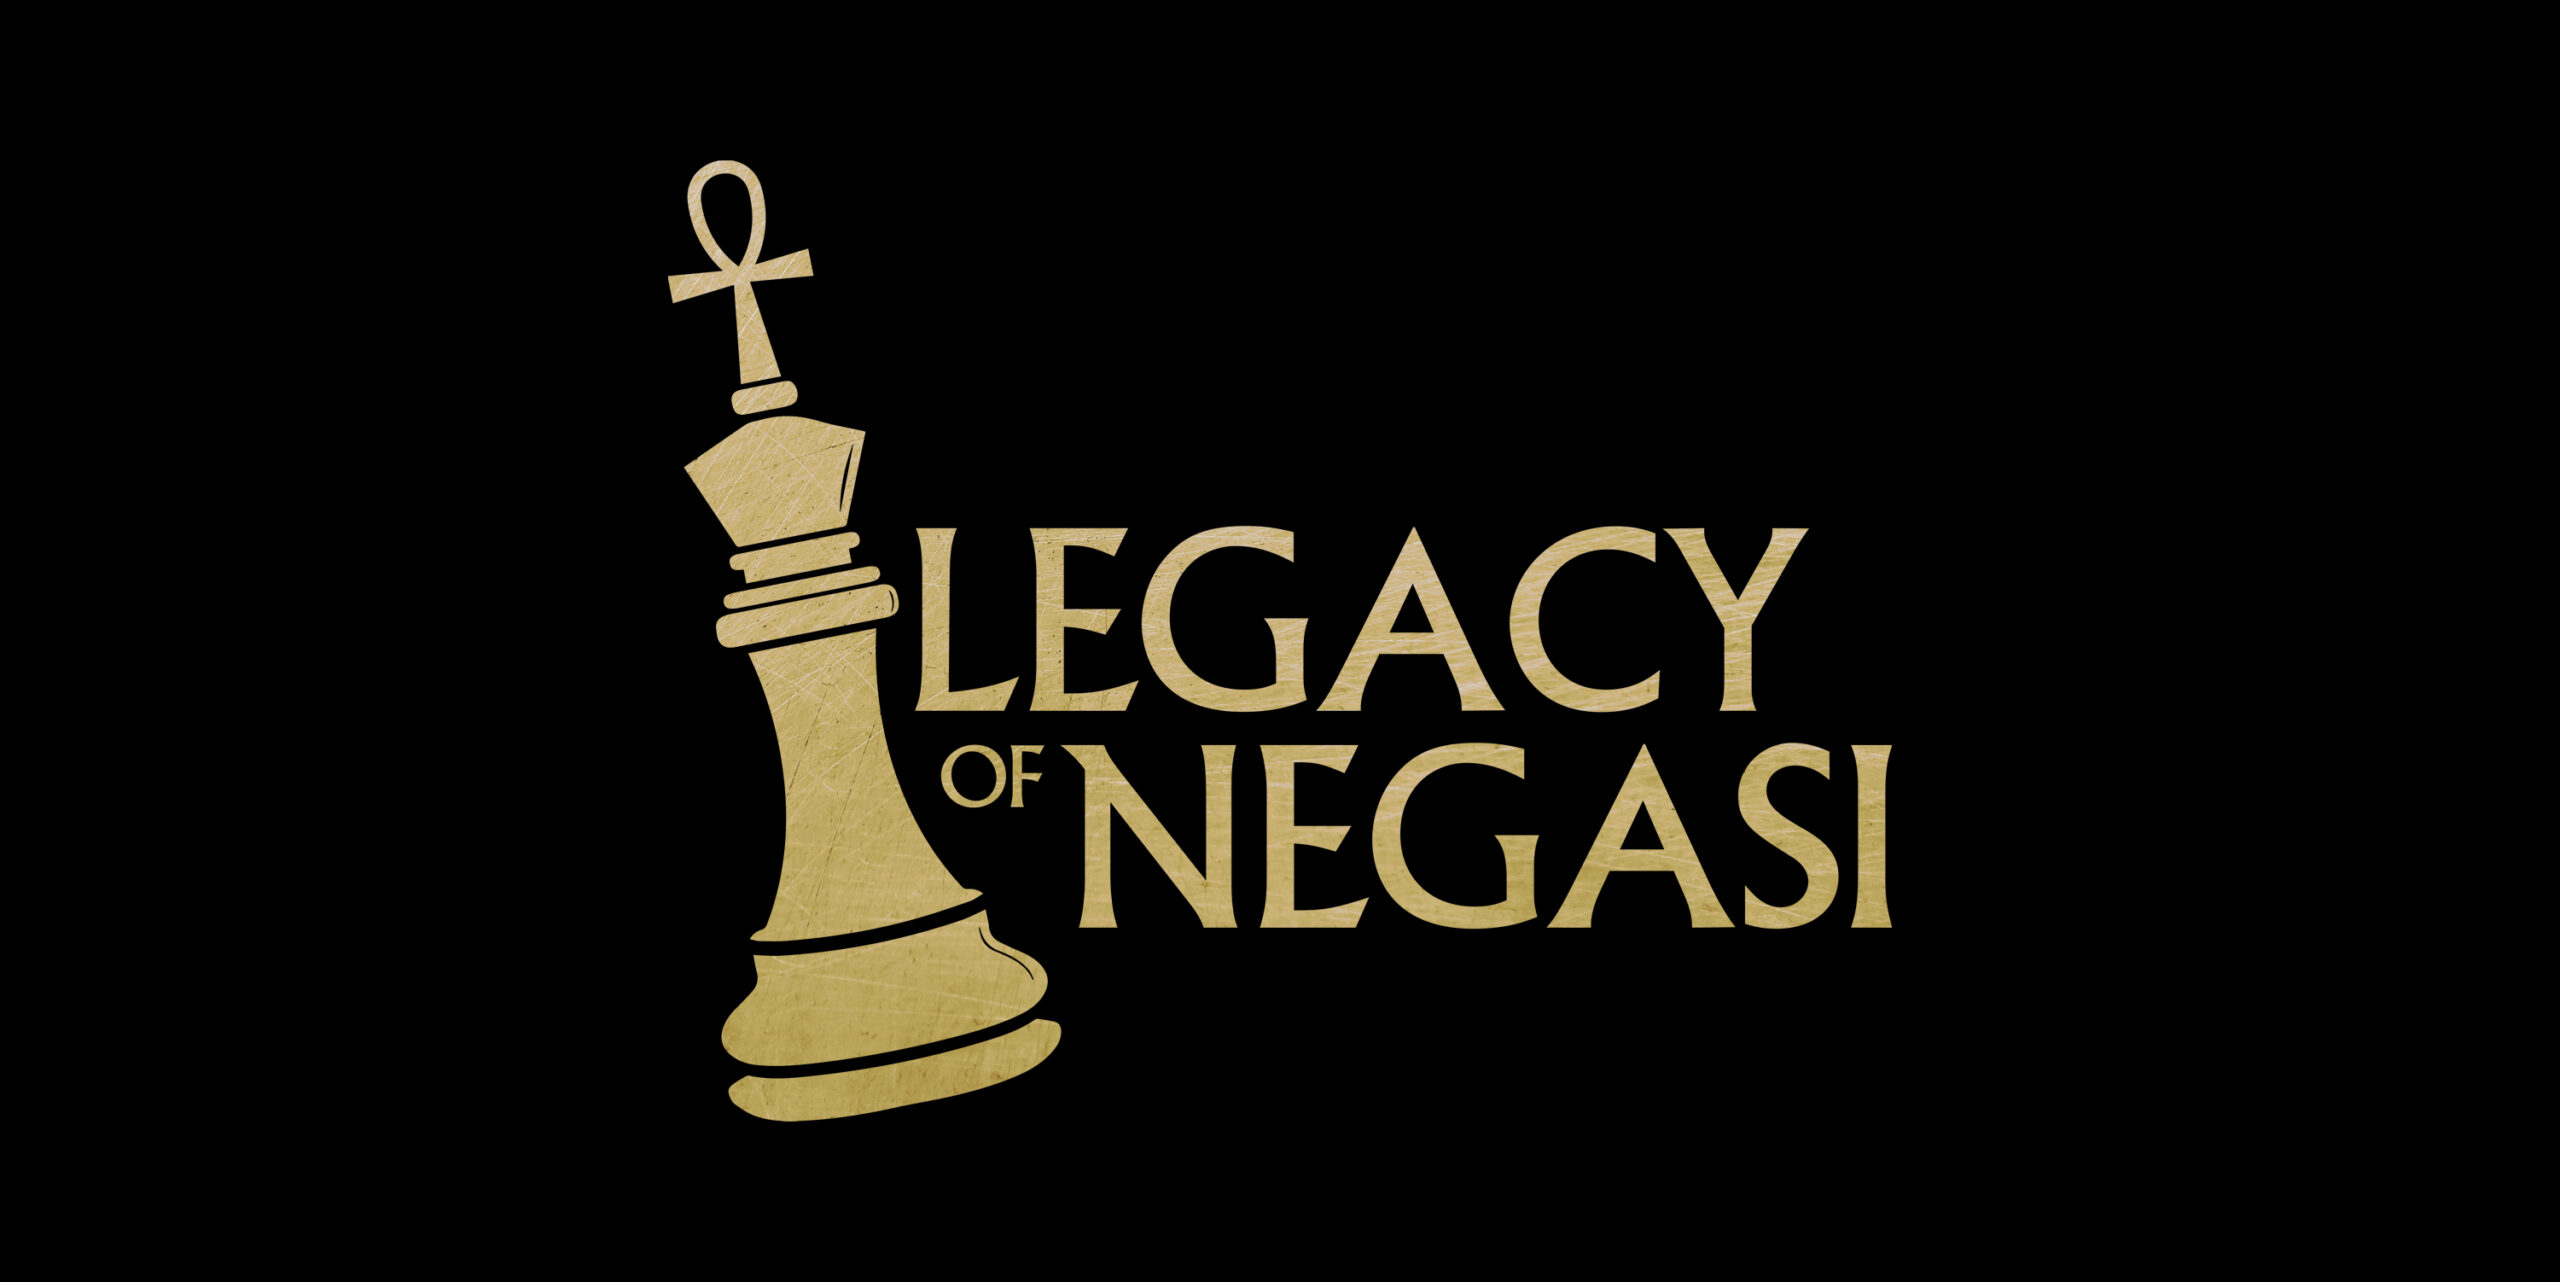 Welcome to Legacy of Negasi!